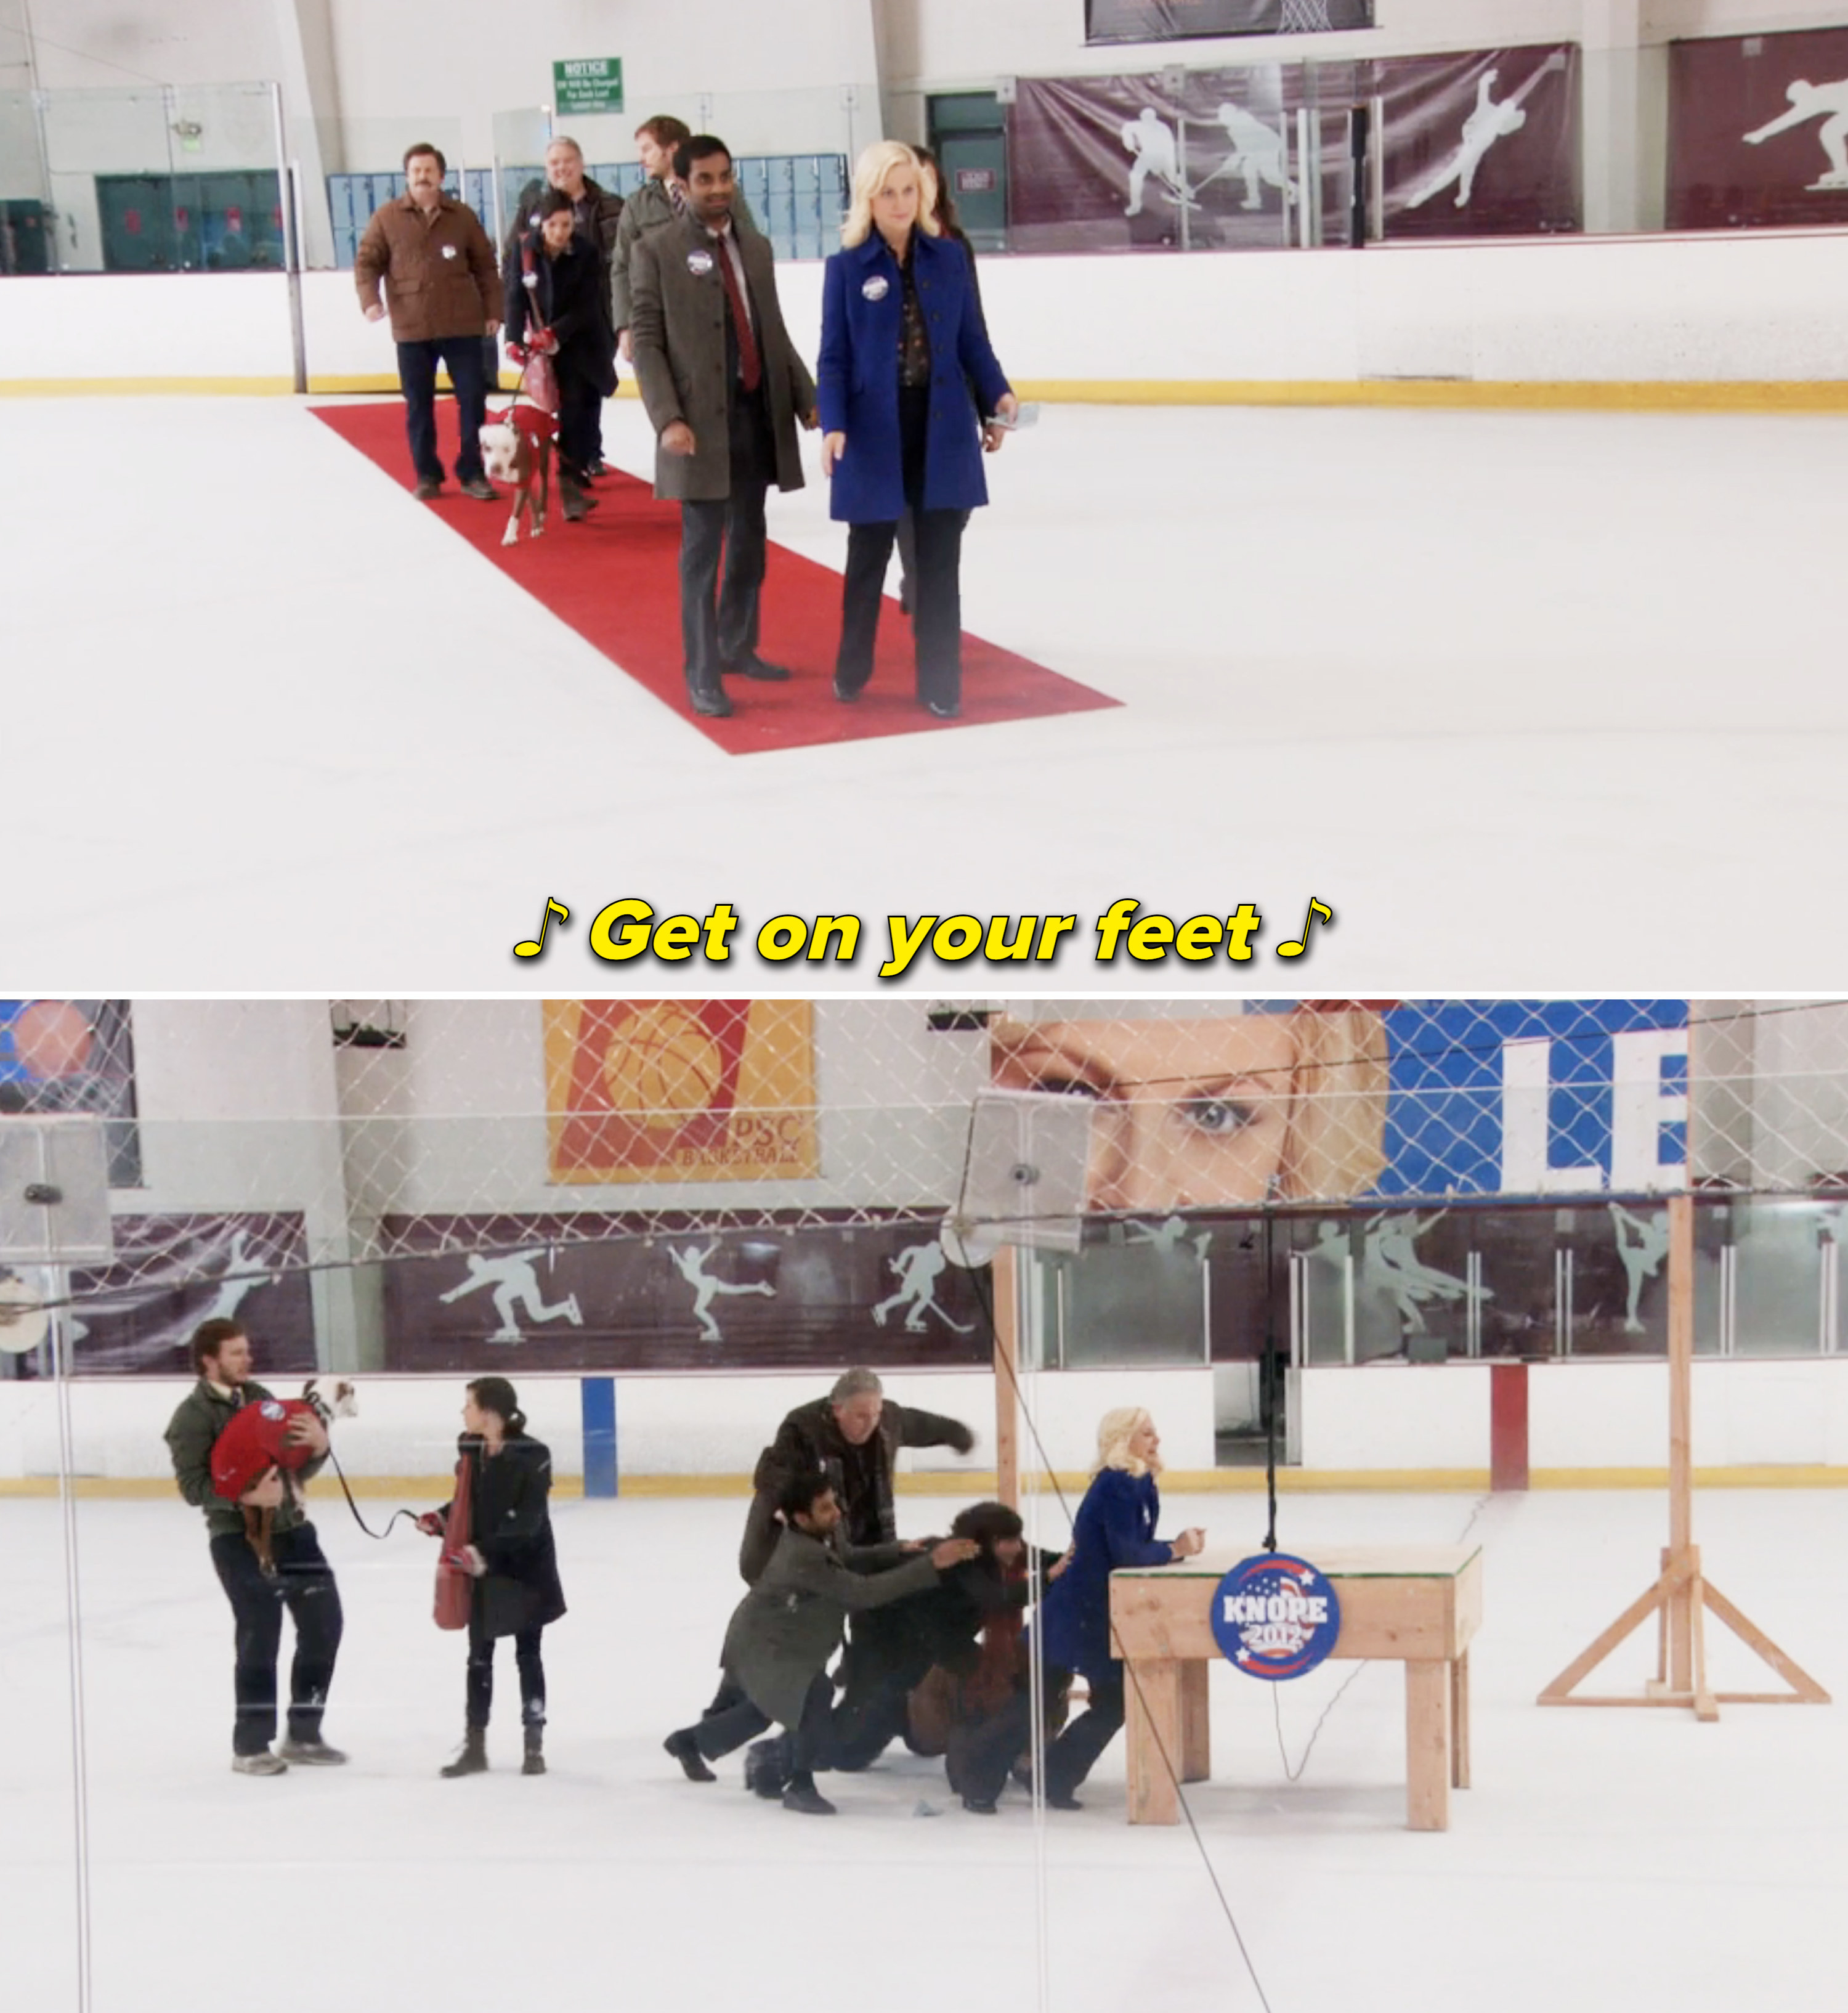 Cast members in a skating rink